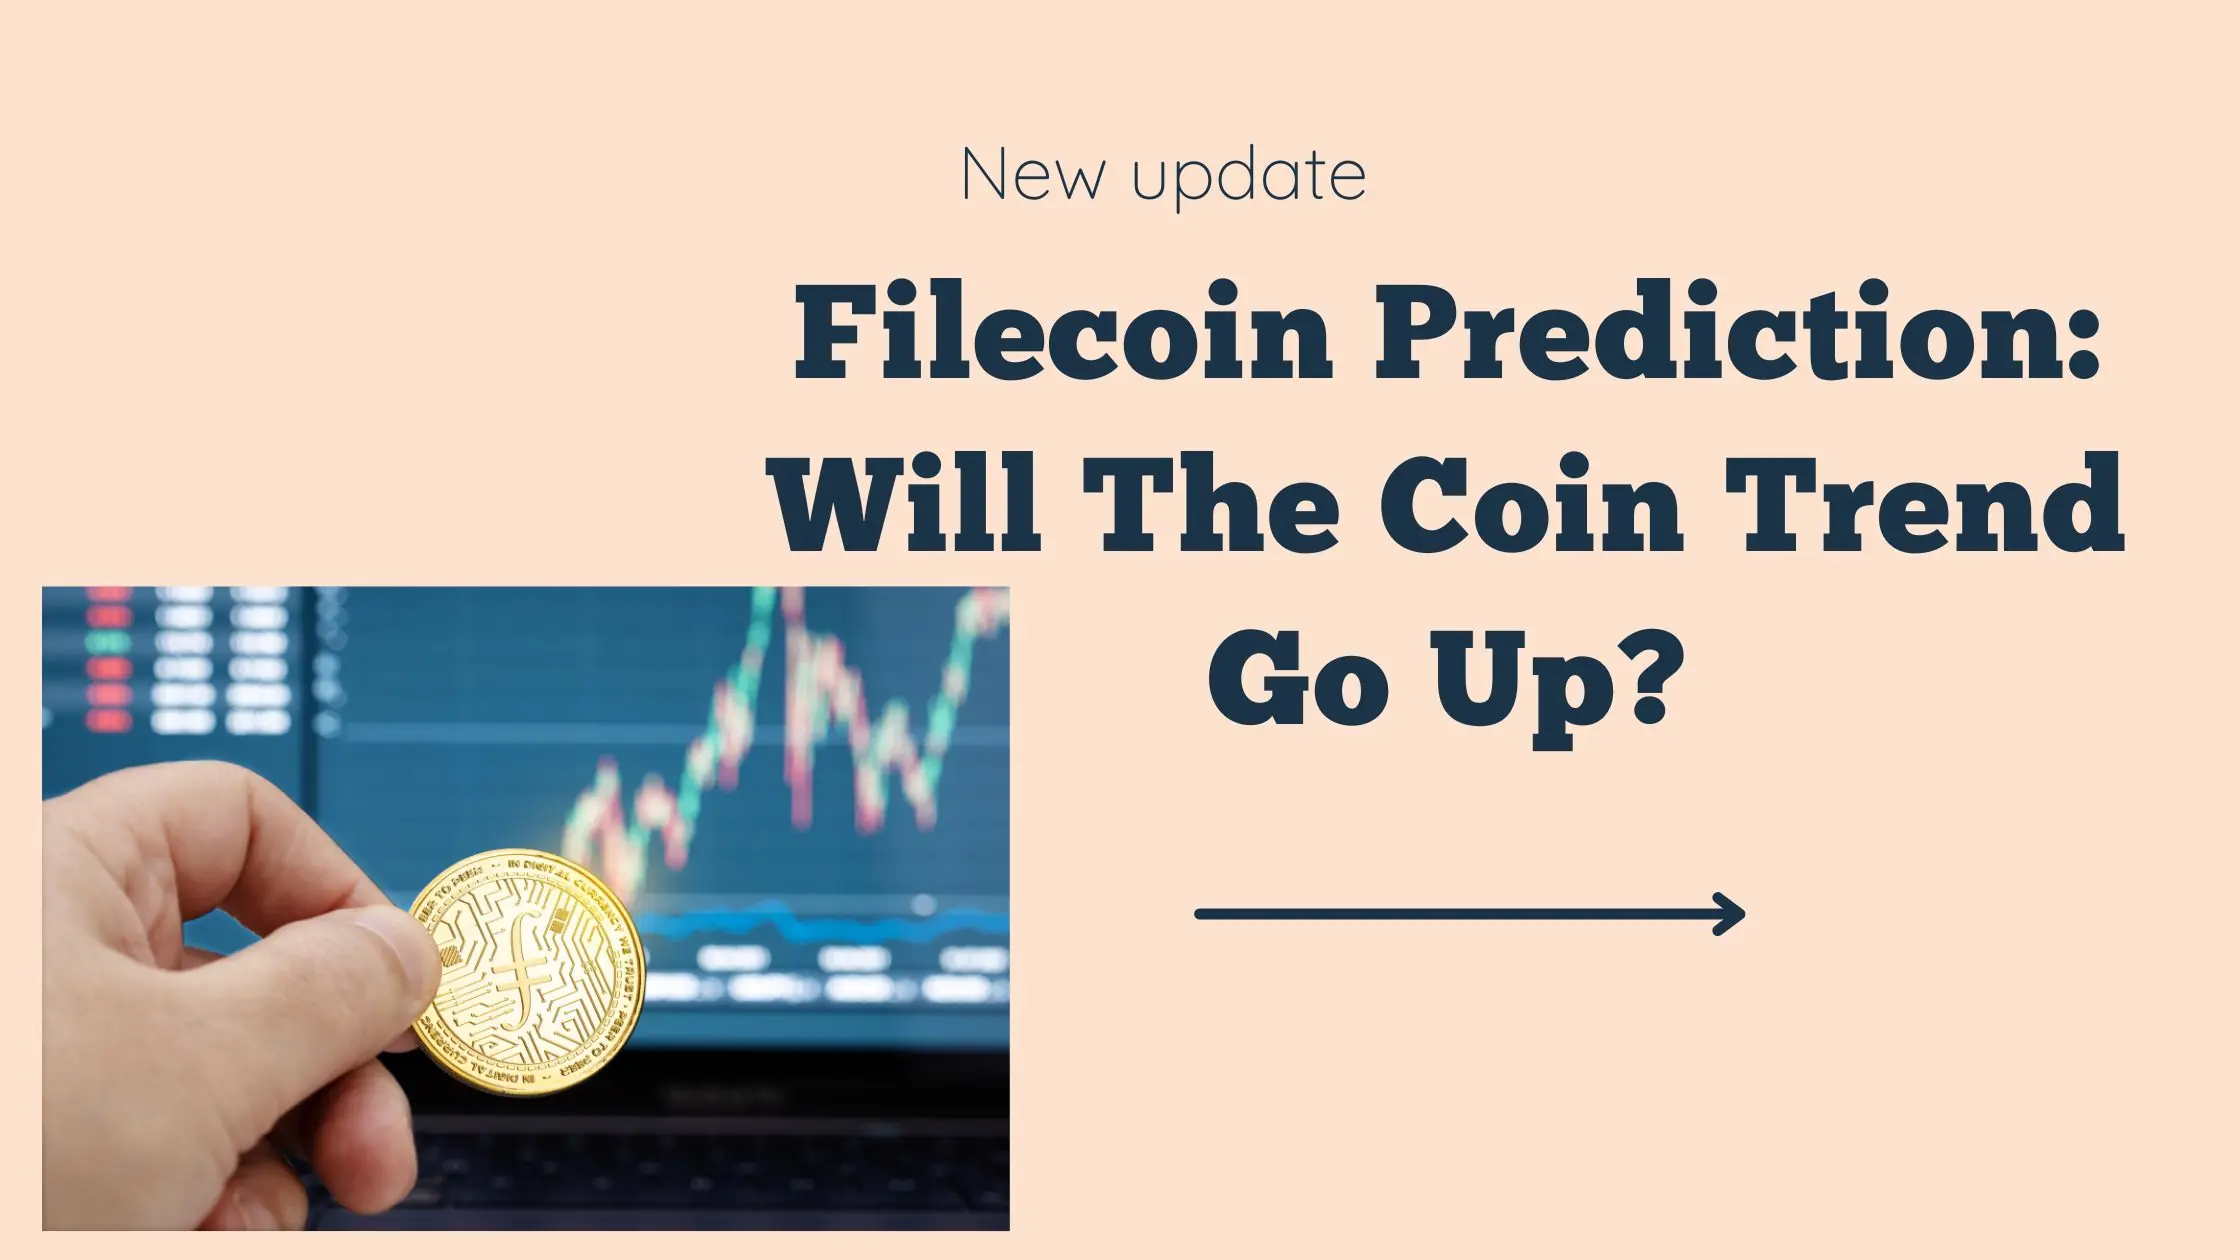 Filecoin Prediction: Will The Coin Trend Go Up?